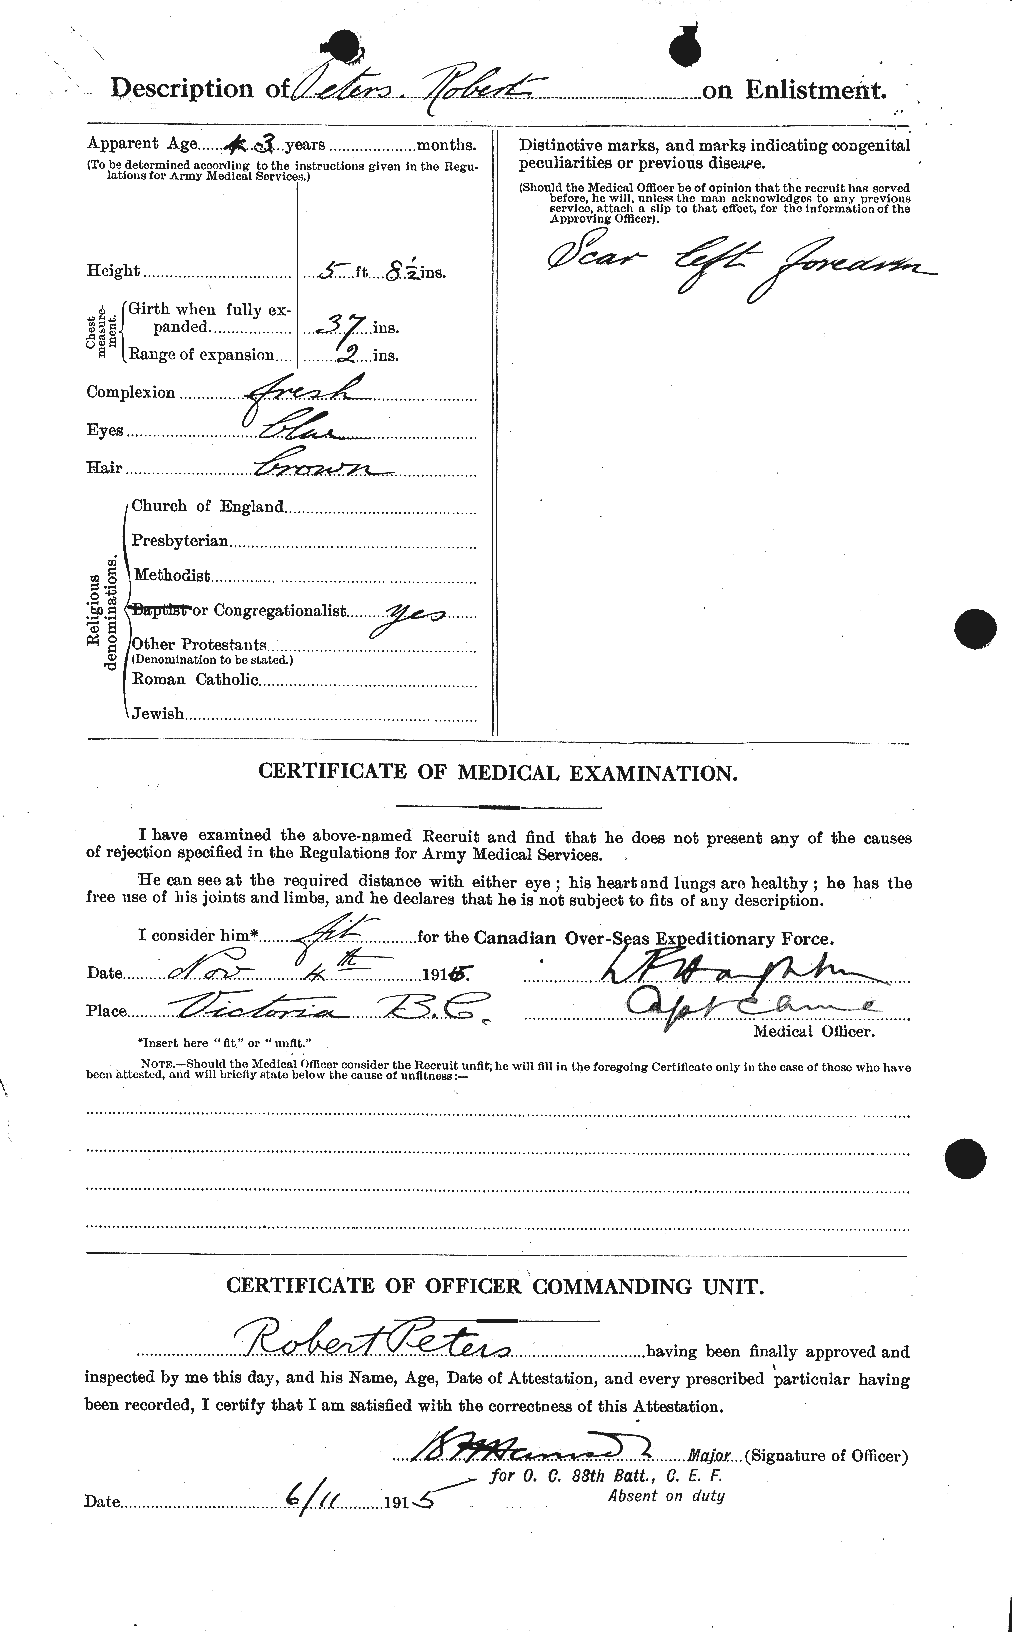 Personnel Records of the First World War - CEF 575611b